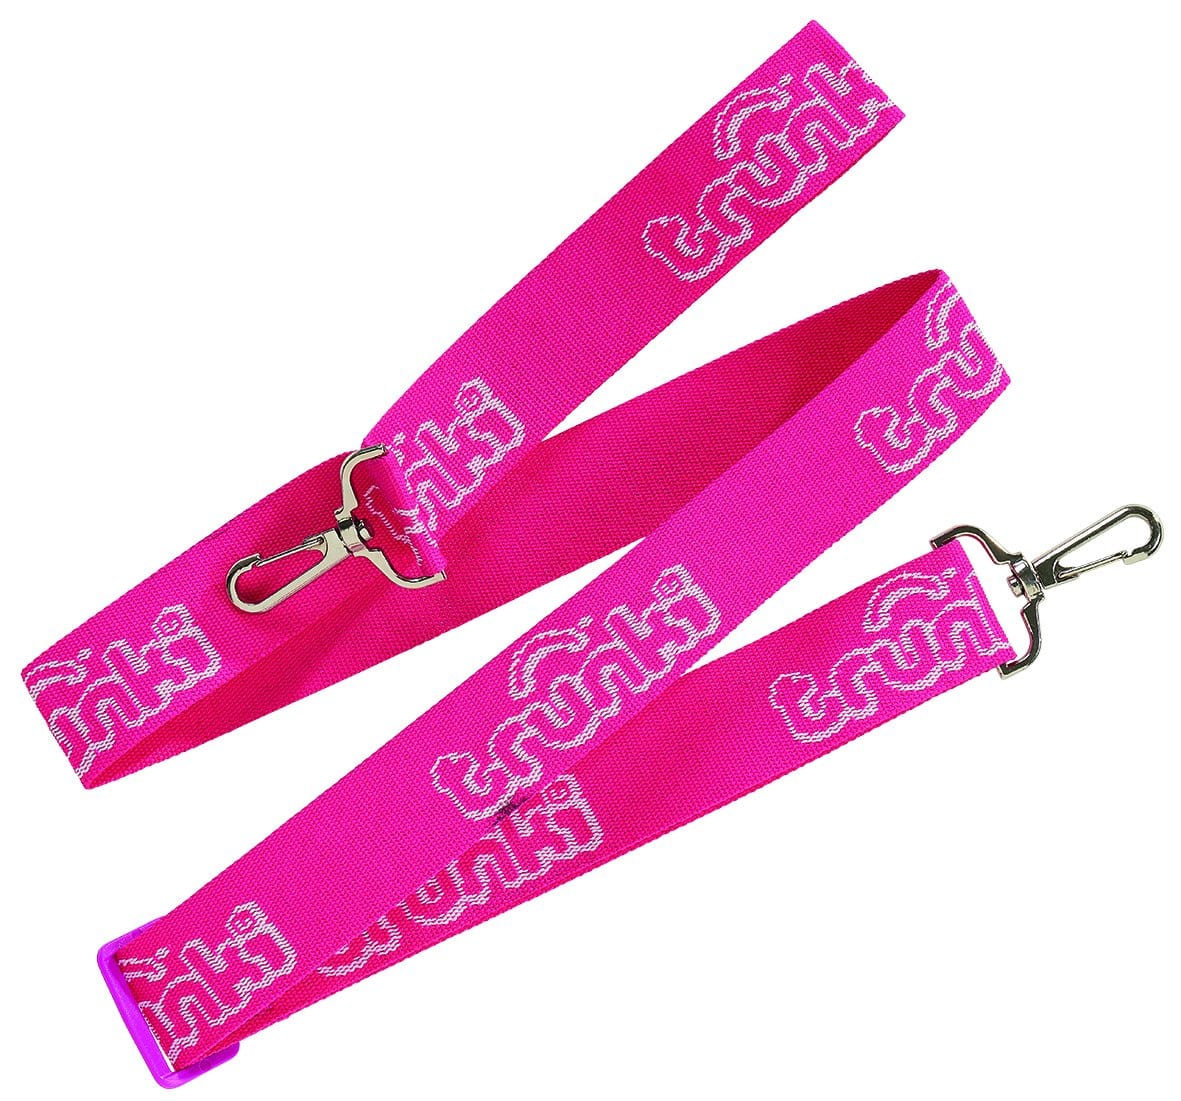 Trunki Folding Scooters Spare Strap - Pink